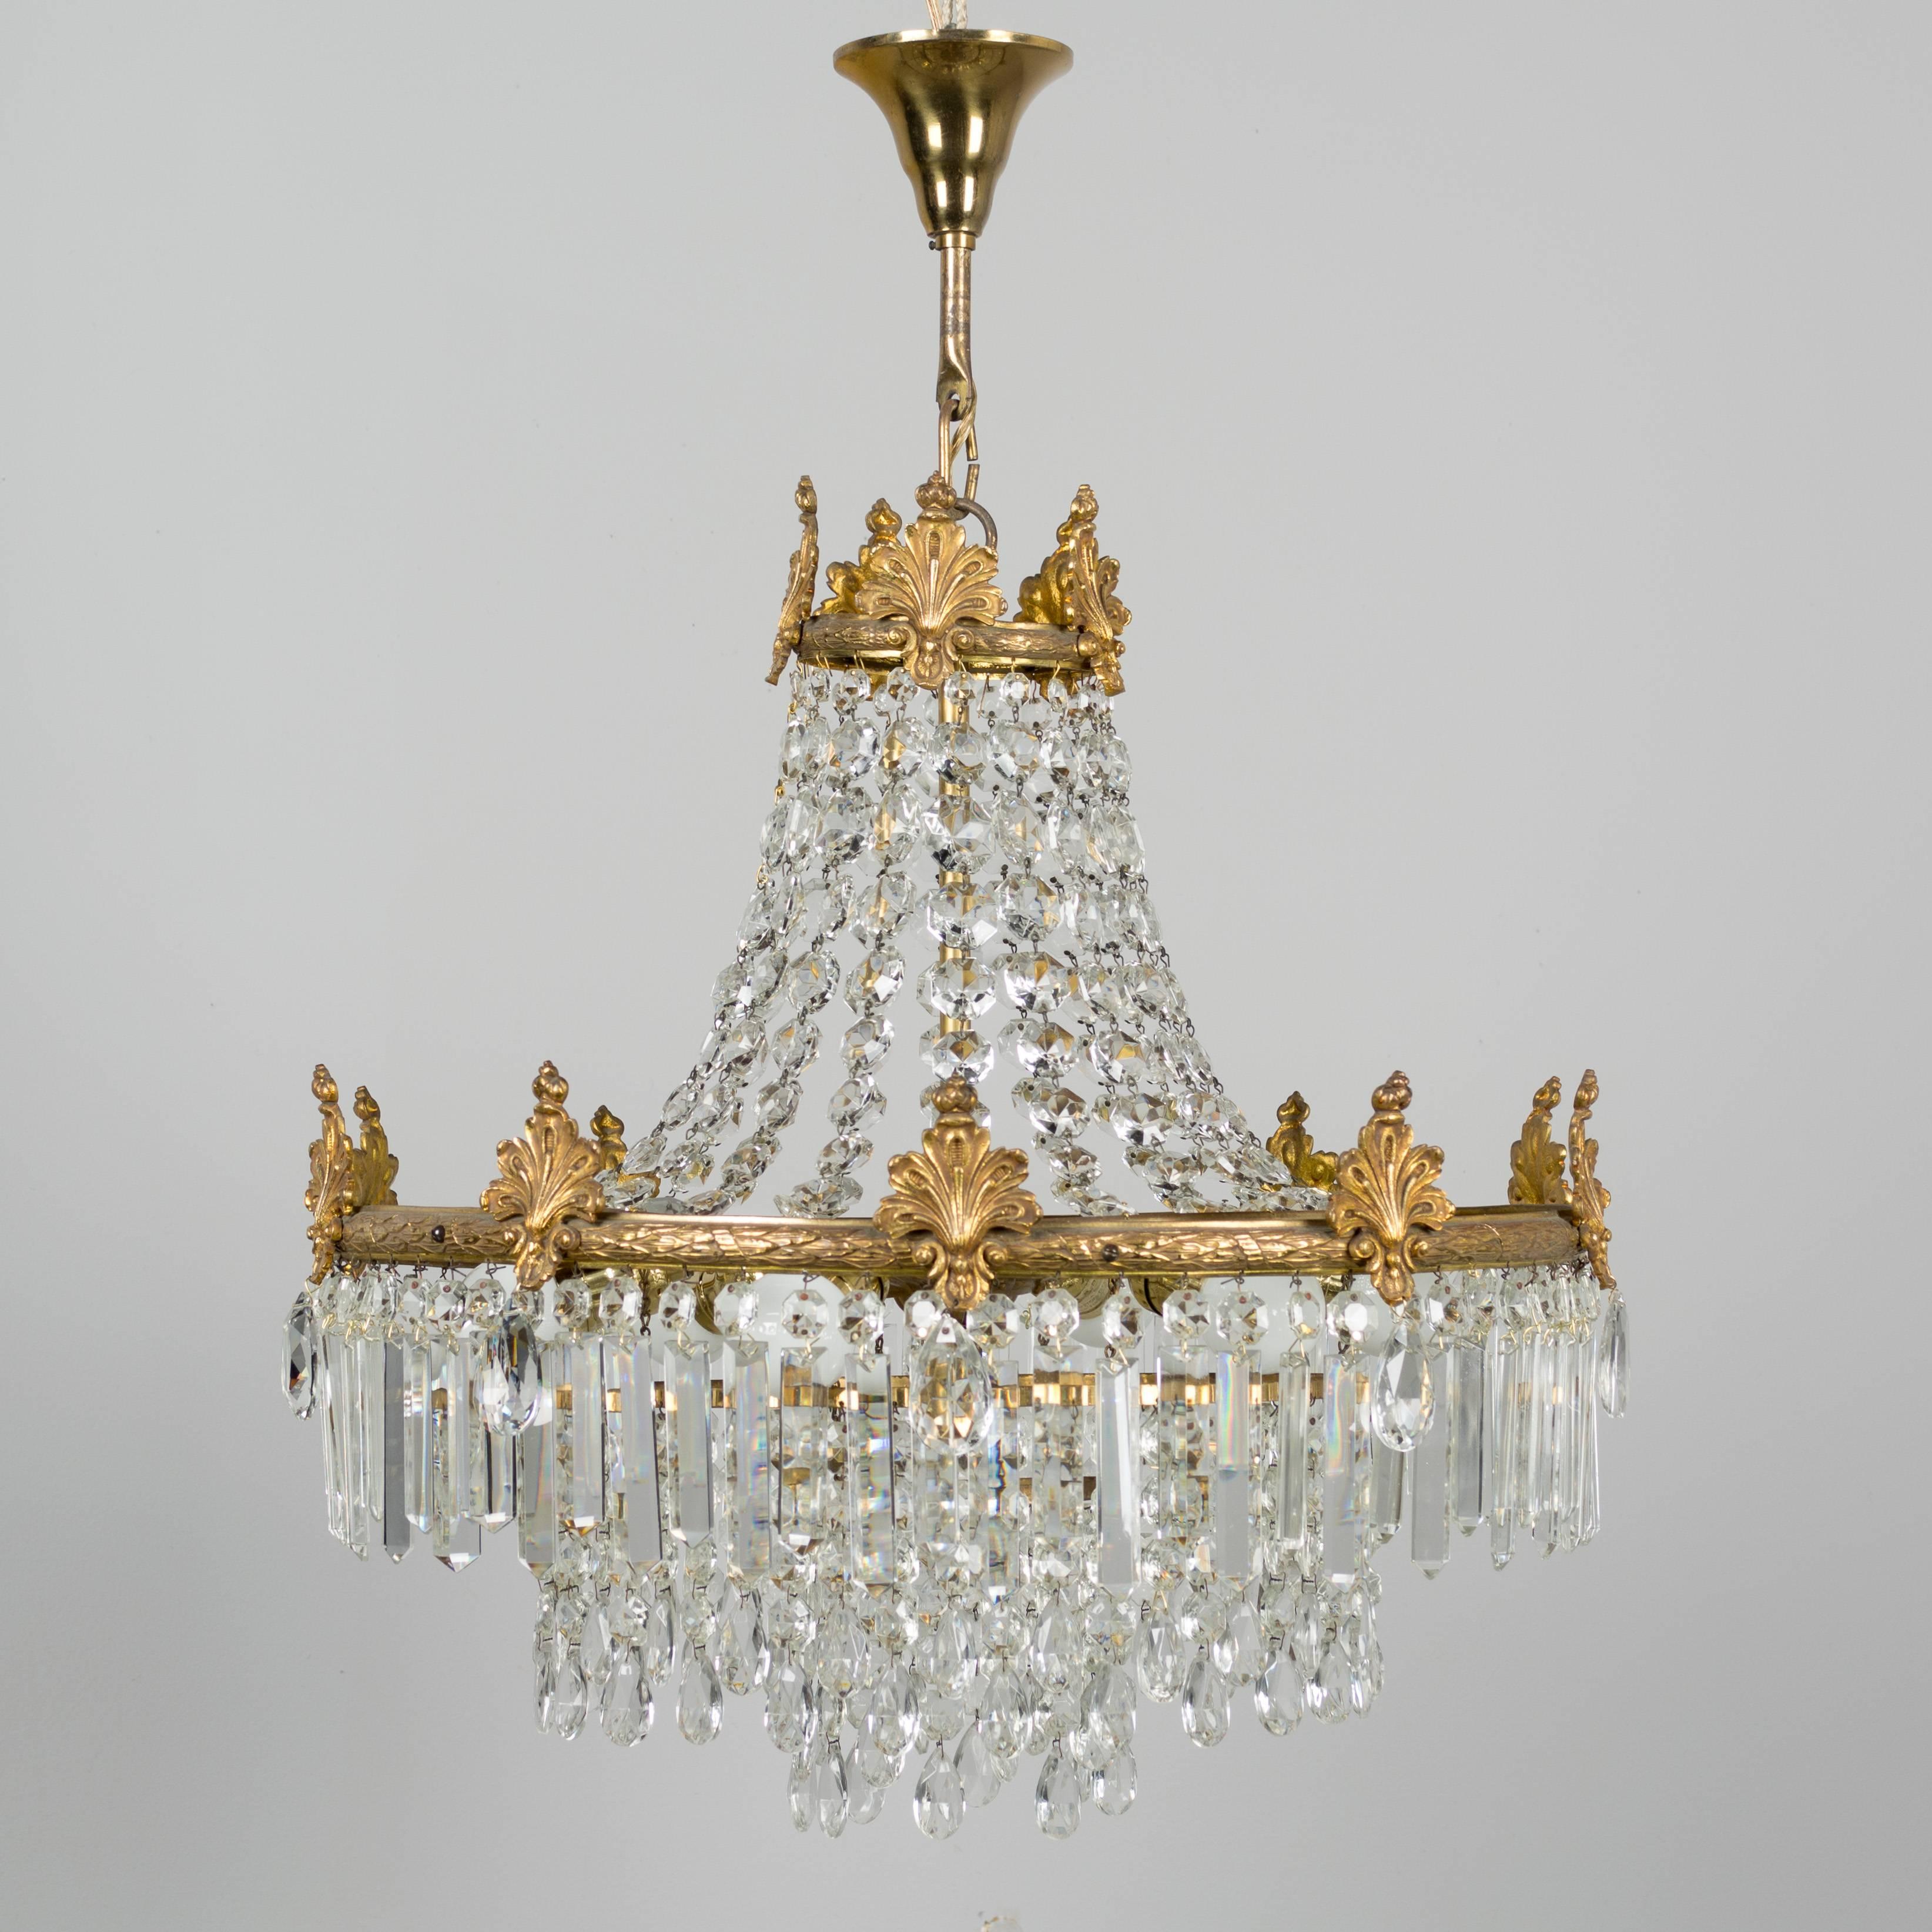 A French Empire style six-light crystal chandelier with brass frame. A beautiful waterfall form with multiple strands of faceted bead chains and three tiers of hanging prisms. The brass has been cleaned and the chandelier is rewired. More photos